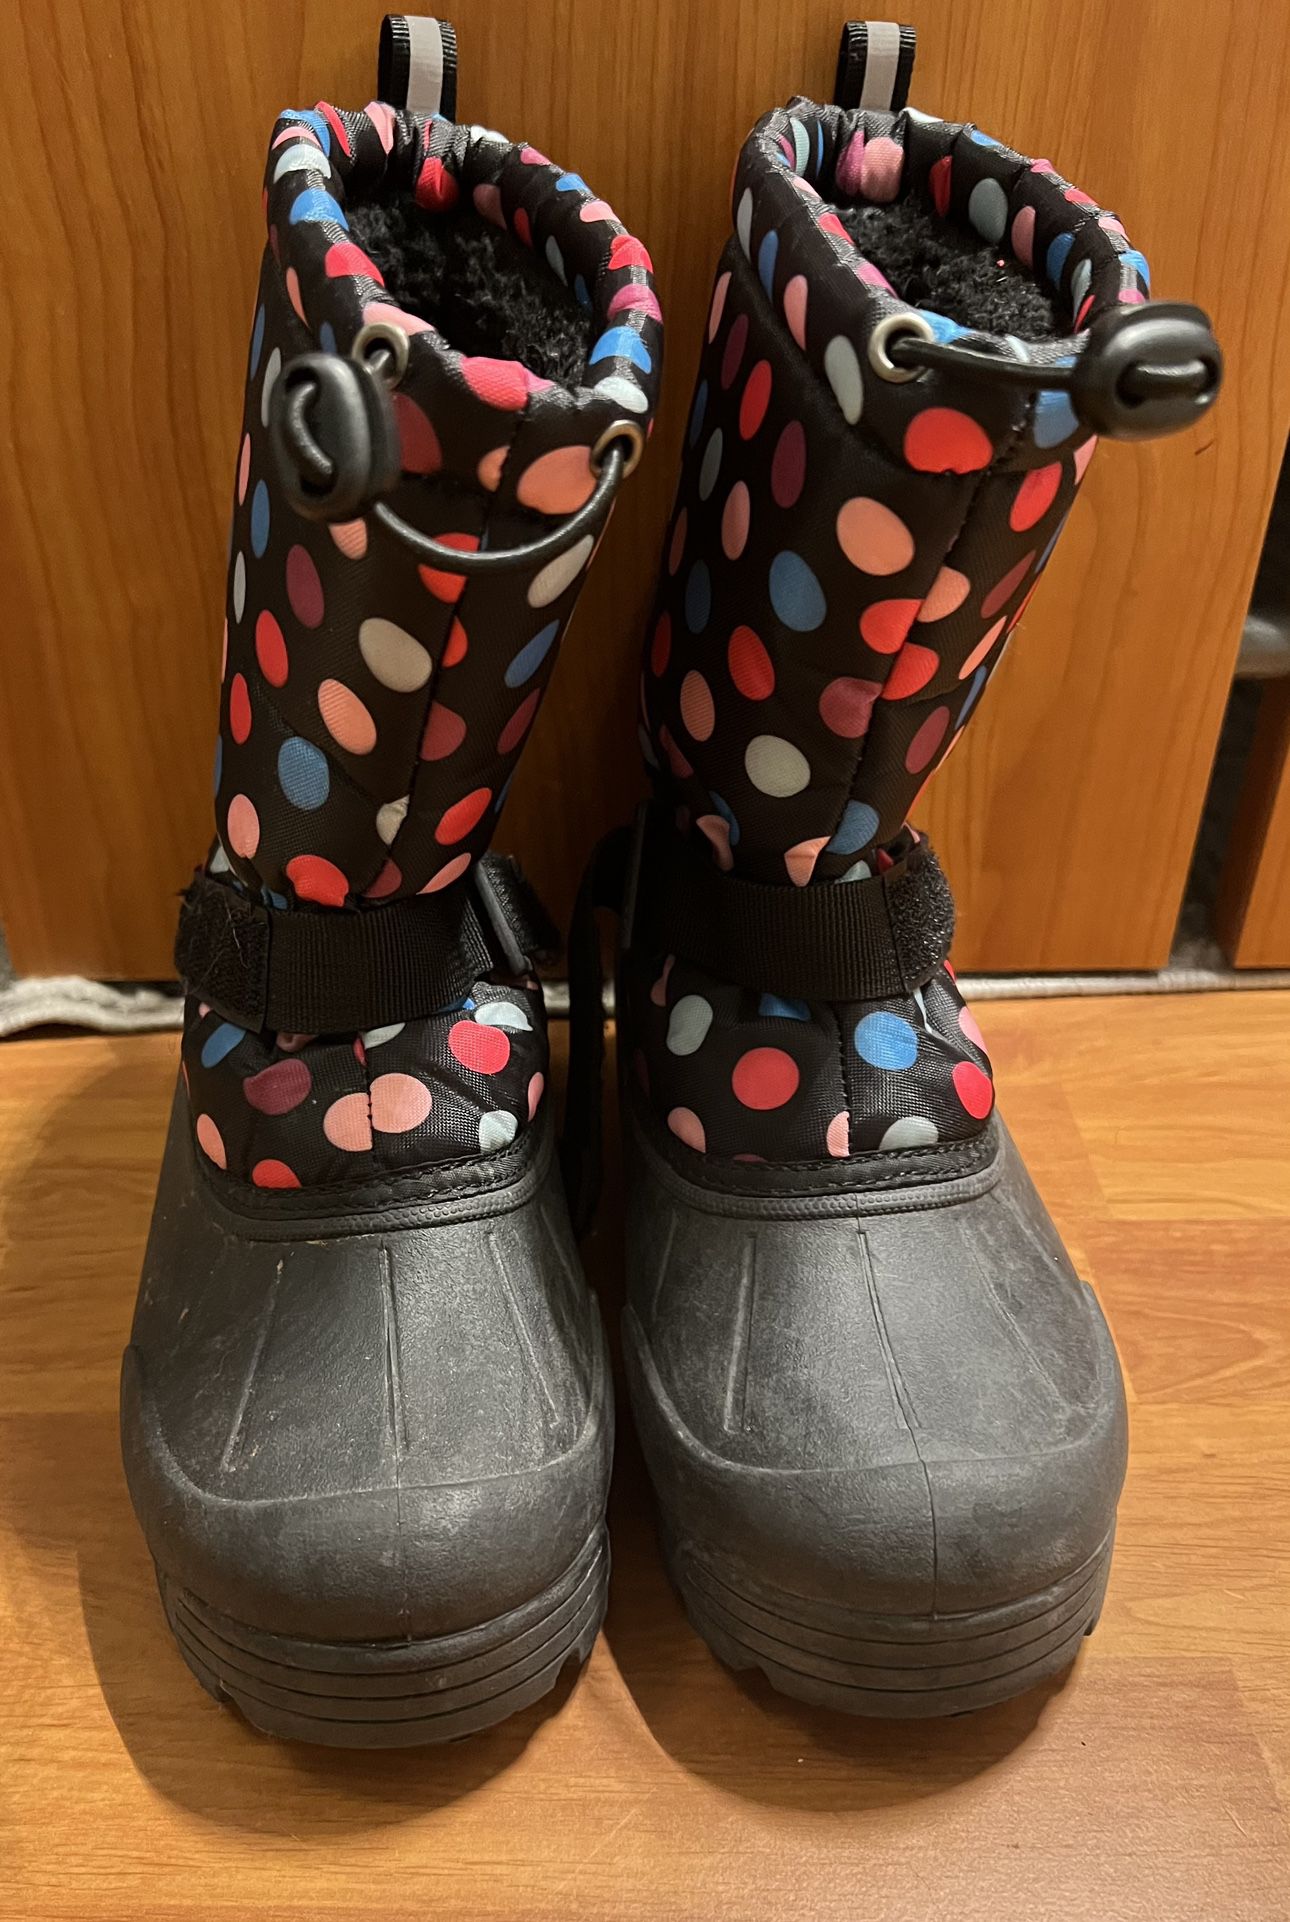 Girl’s Snow Boots 